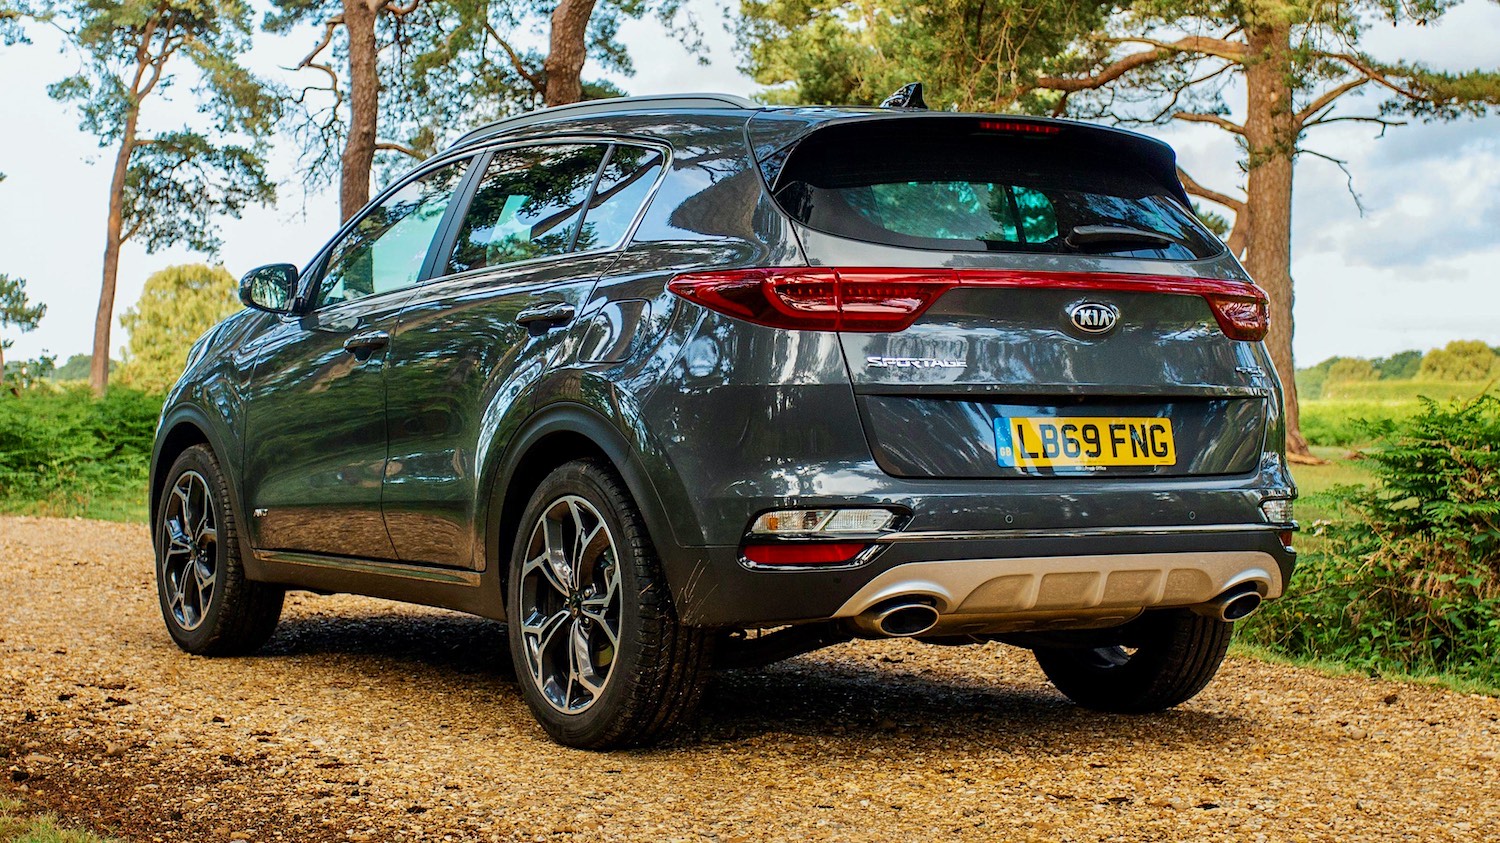 Drive Co Uk Reviewed Kia Sportage Gt Line S Punches Above Its Price